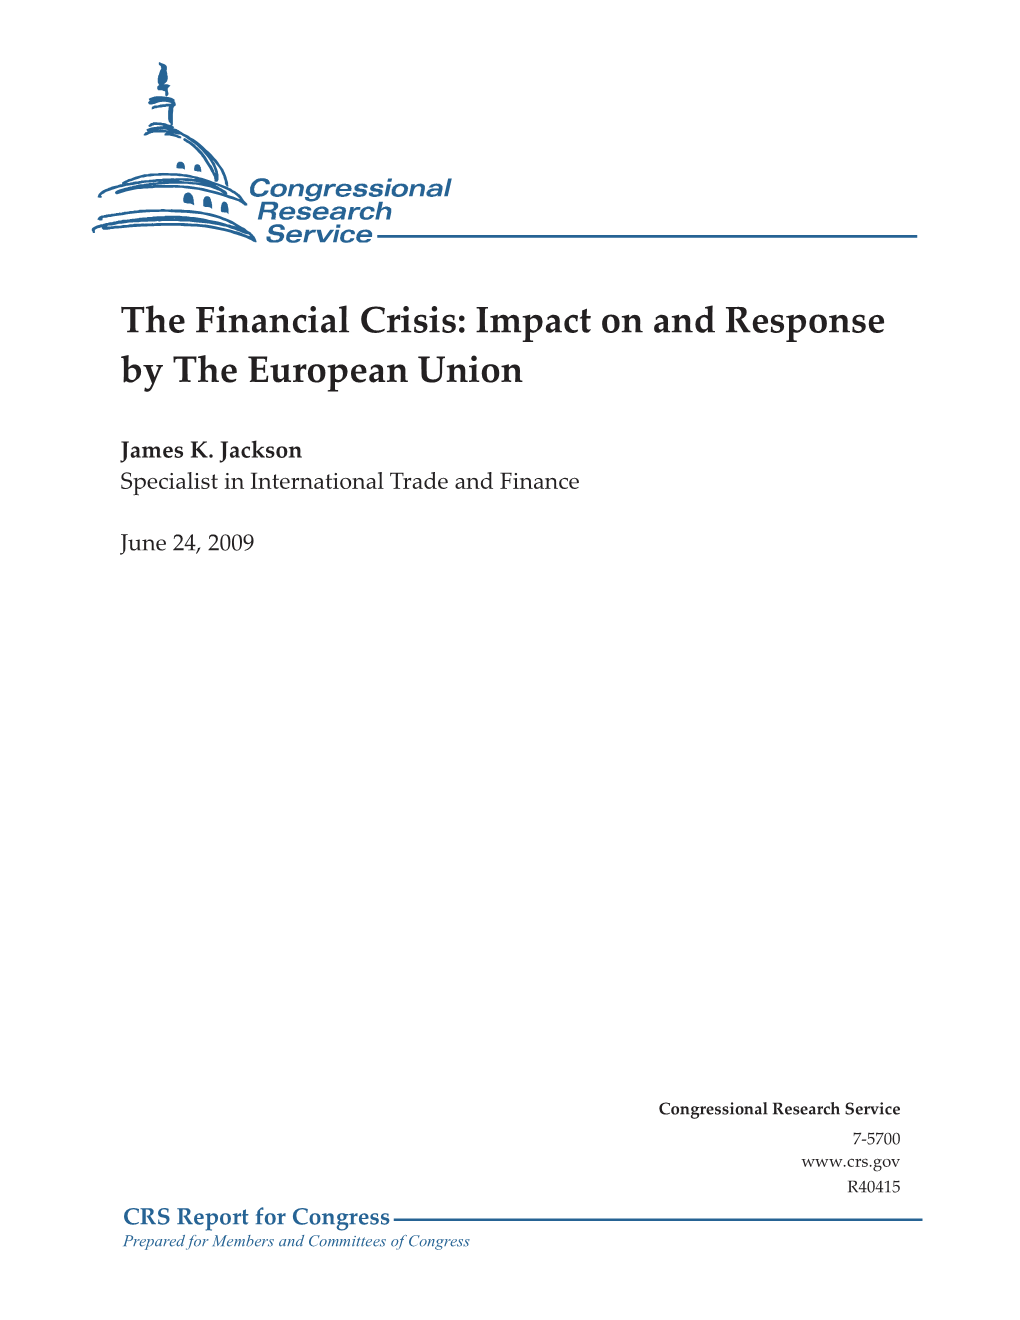 The Financial Crisis: Impact on and Response by the European Union